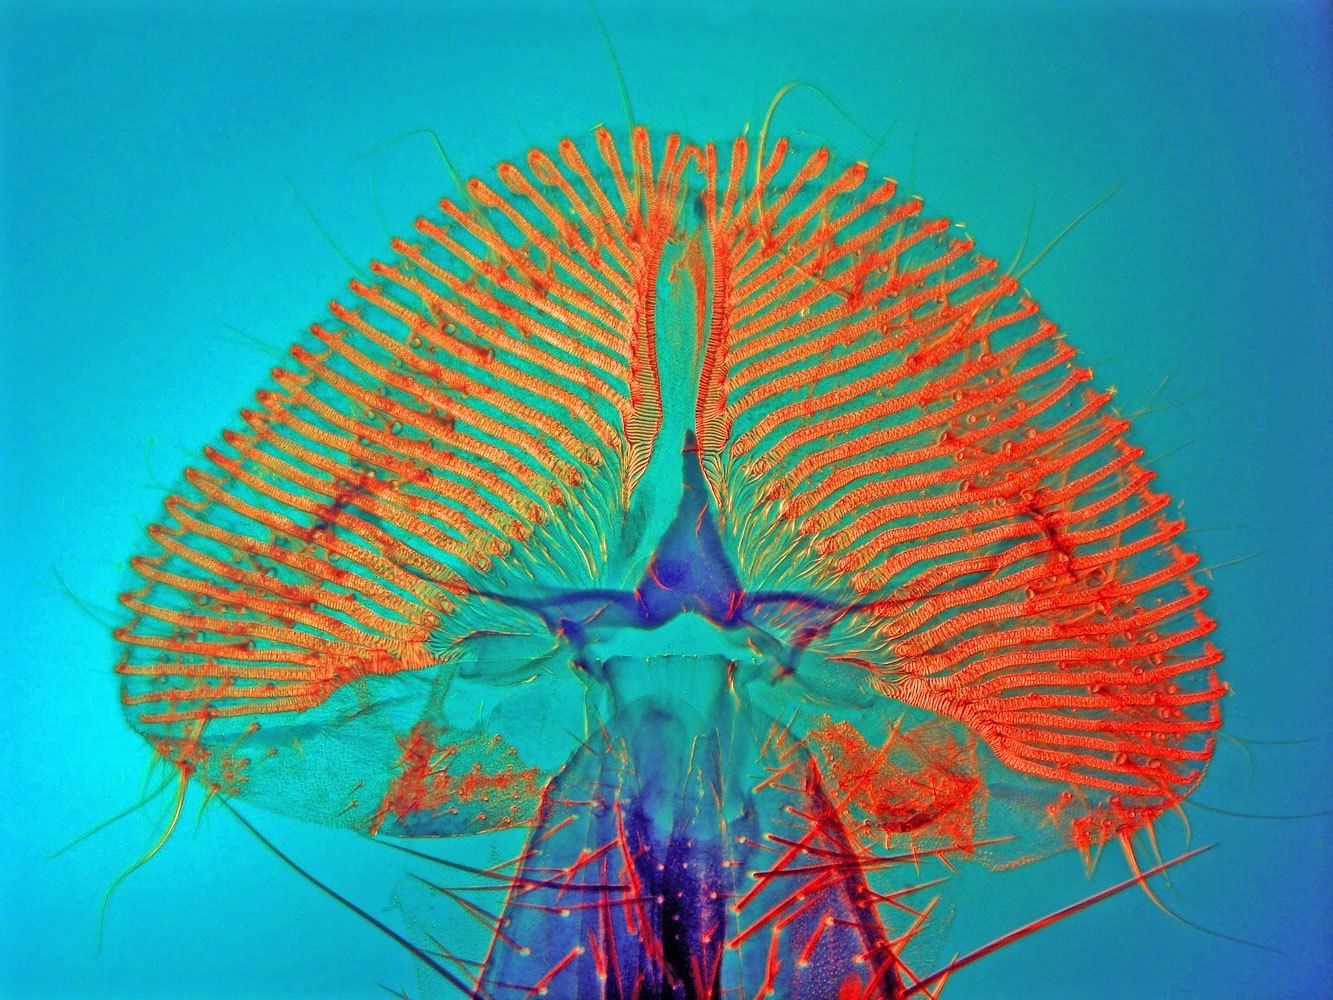 Honorable Mention: Proboscis of a blowfly.